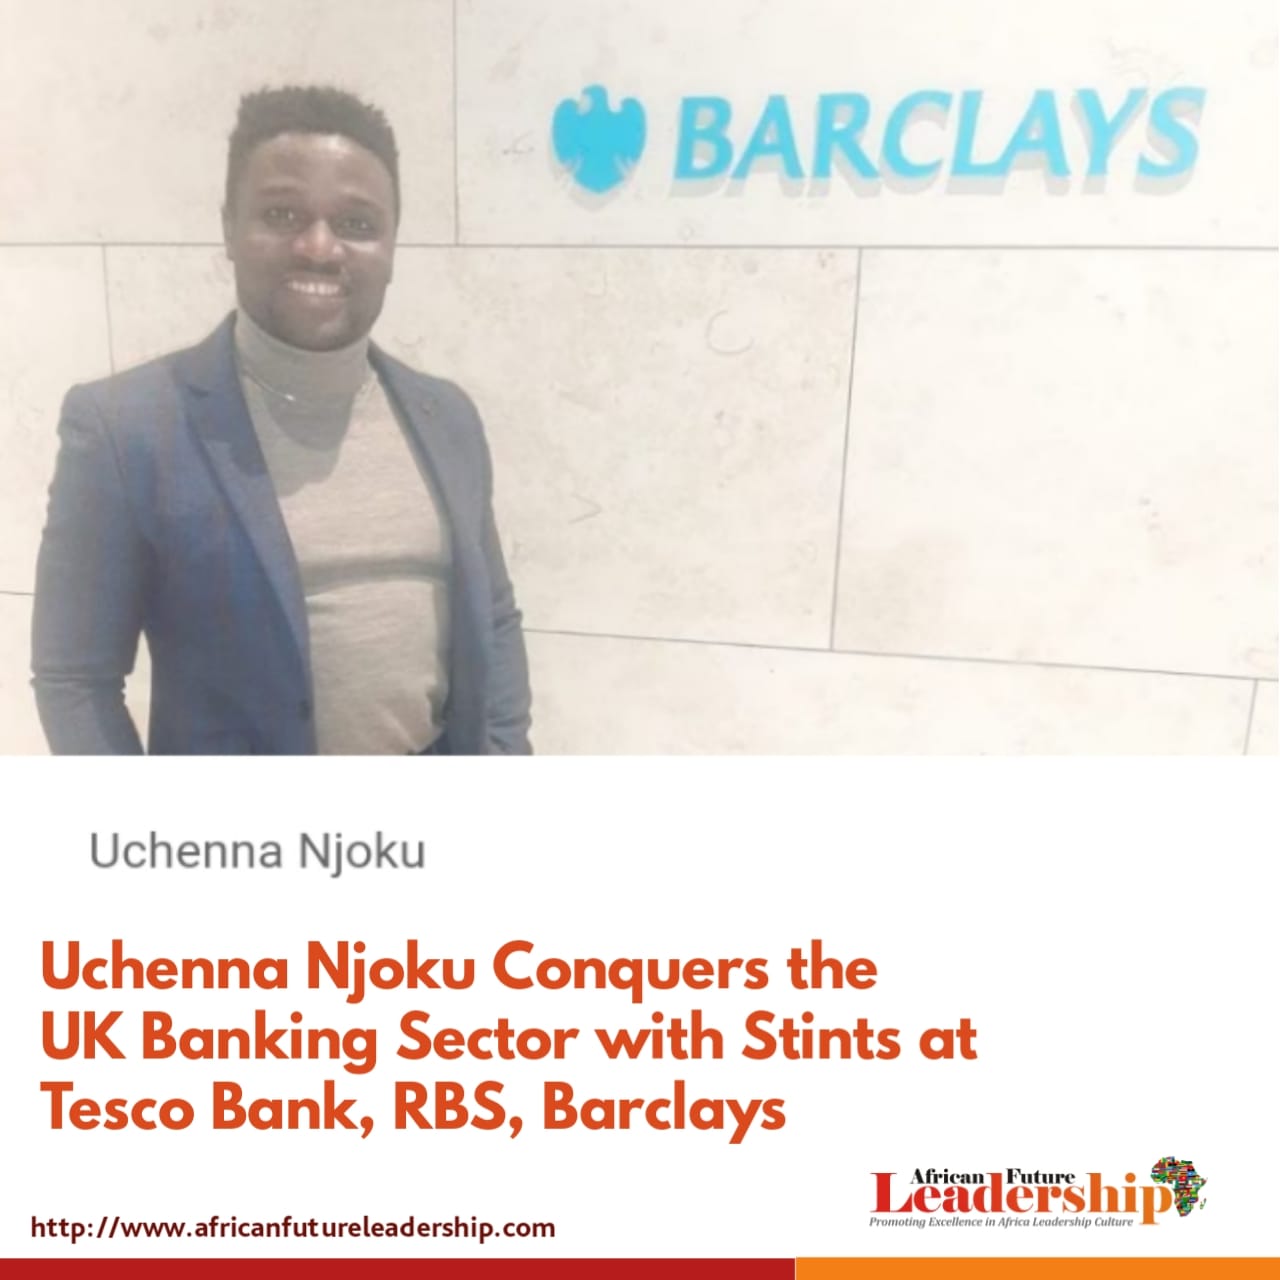 Uchenna Njoku Conquers the UK Banking Sector with Stints at Tesco Bank, RBS, Barclays